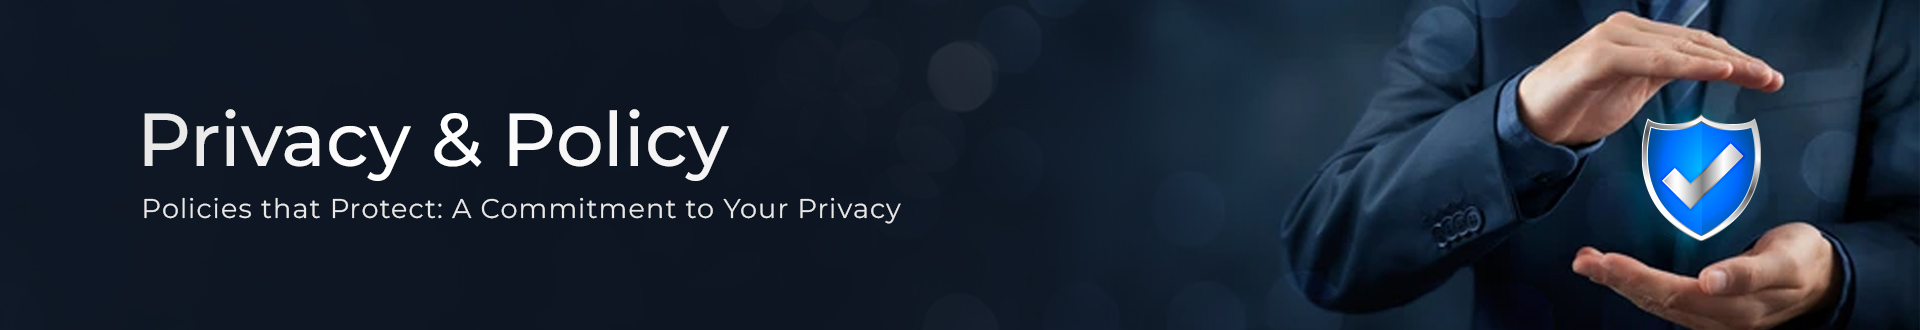 NGEN IT Privacy Policy